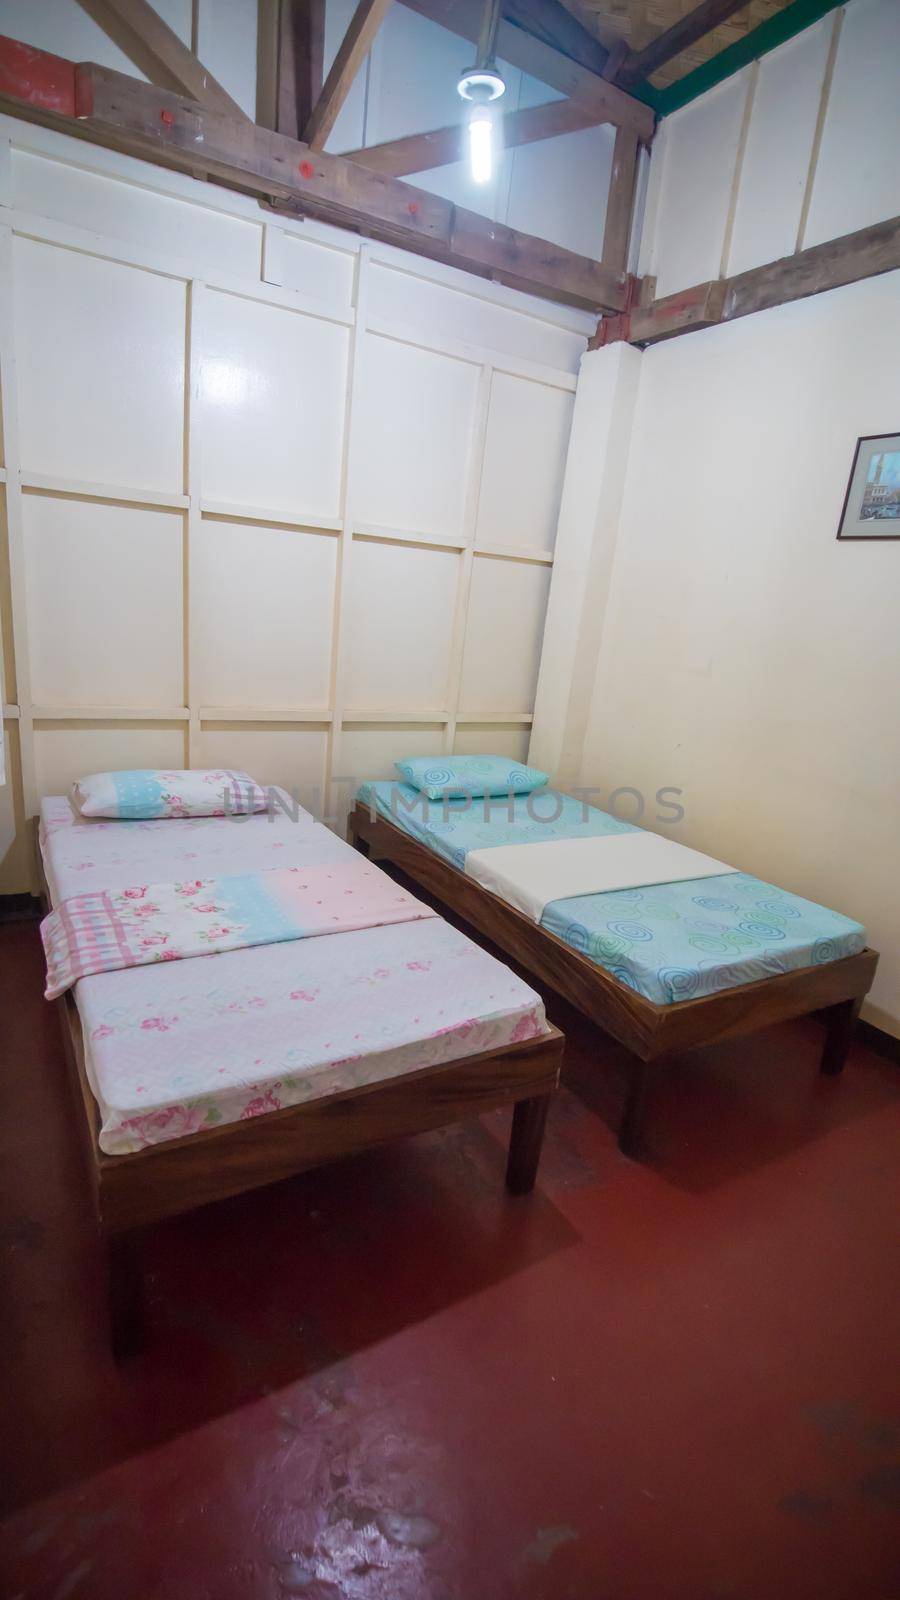 Budget Triple Hostel Room. Two beds. Asian country. by DovidPro